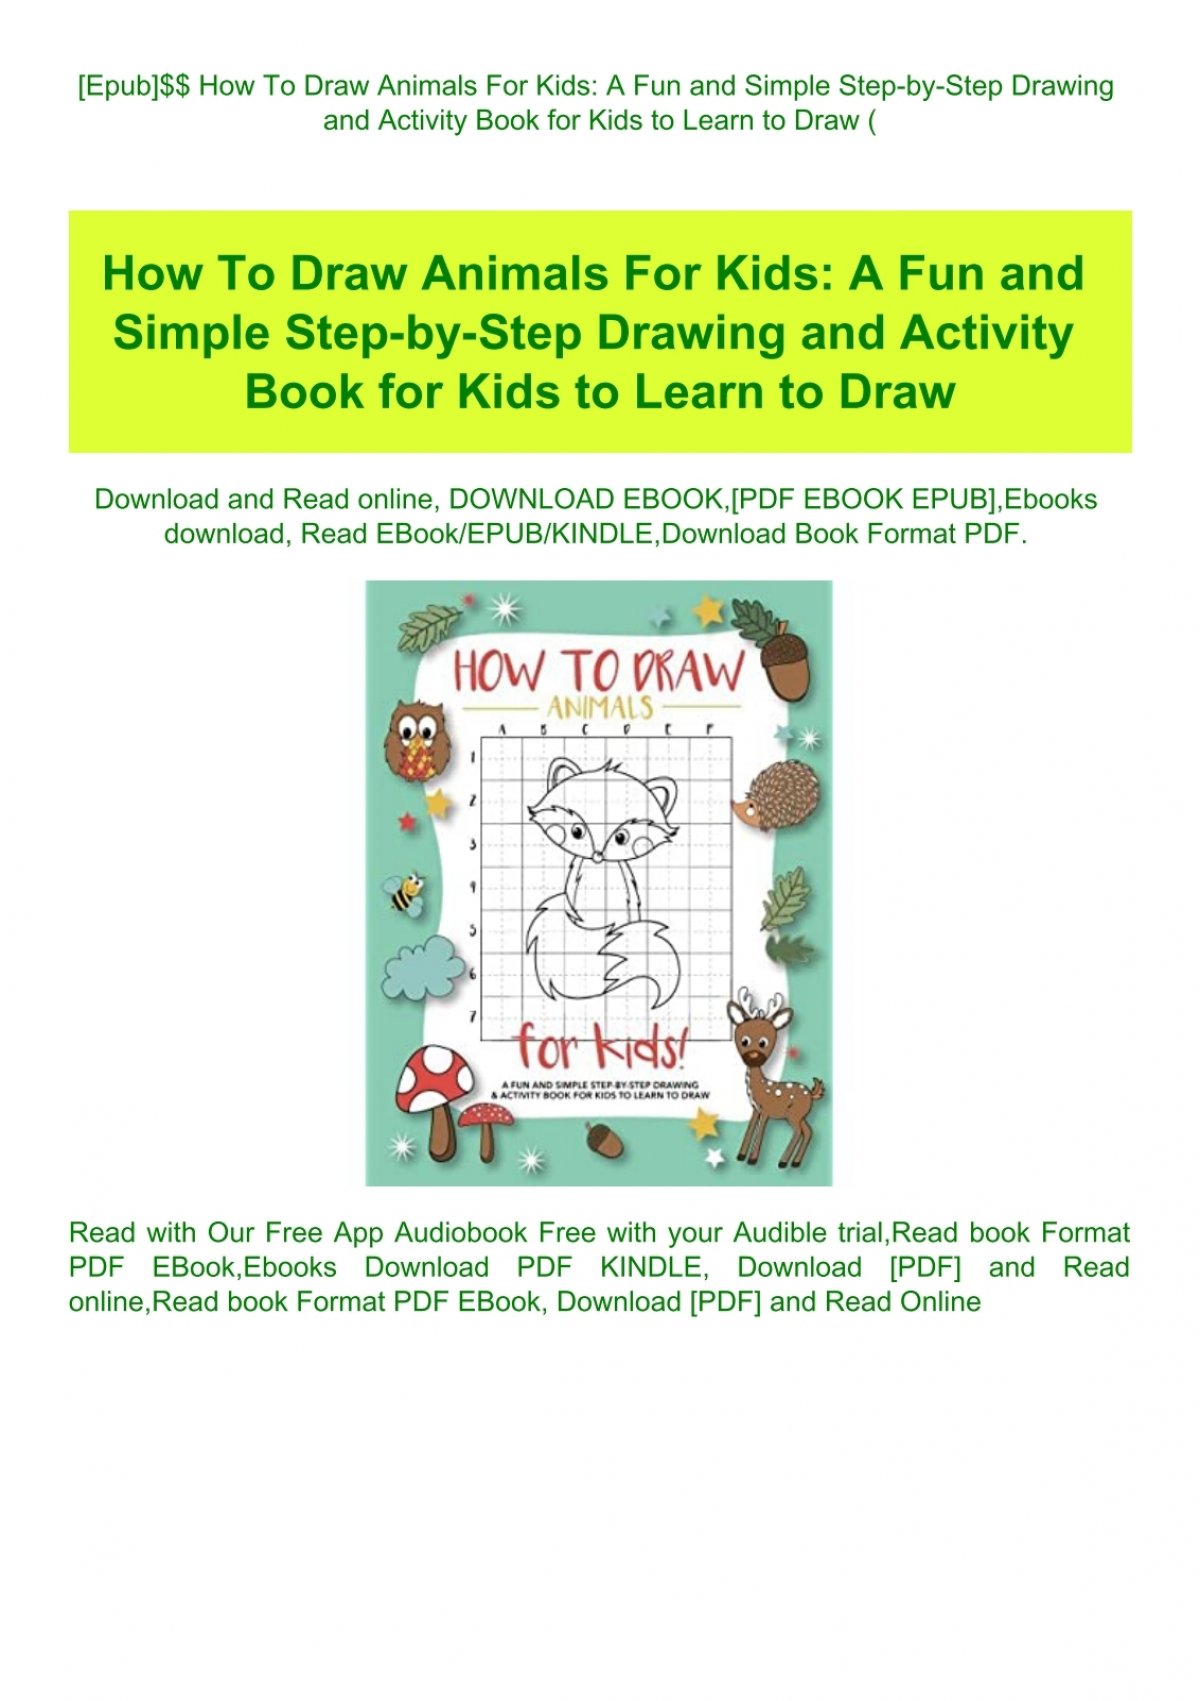 How To Draw Animals For Kids: A Fun and Simple Step-by-Step